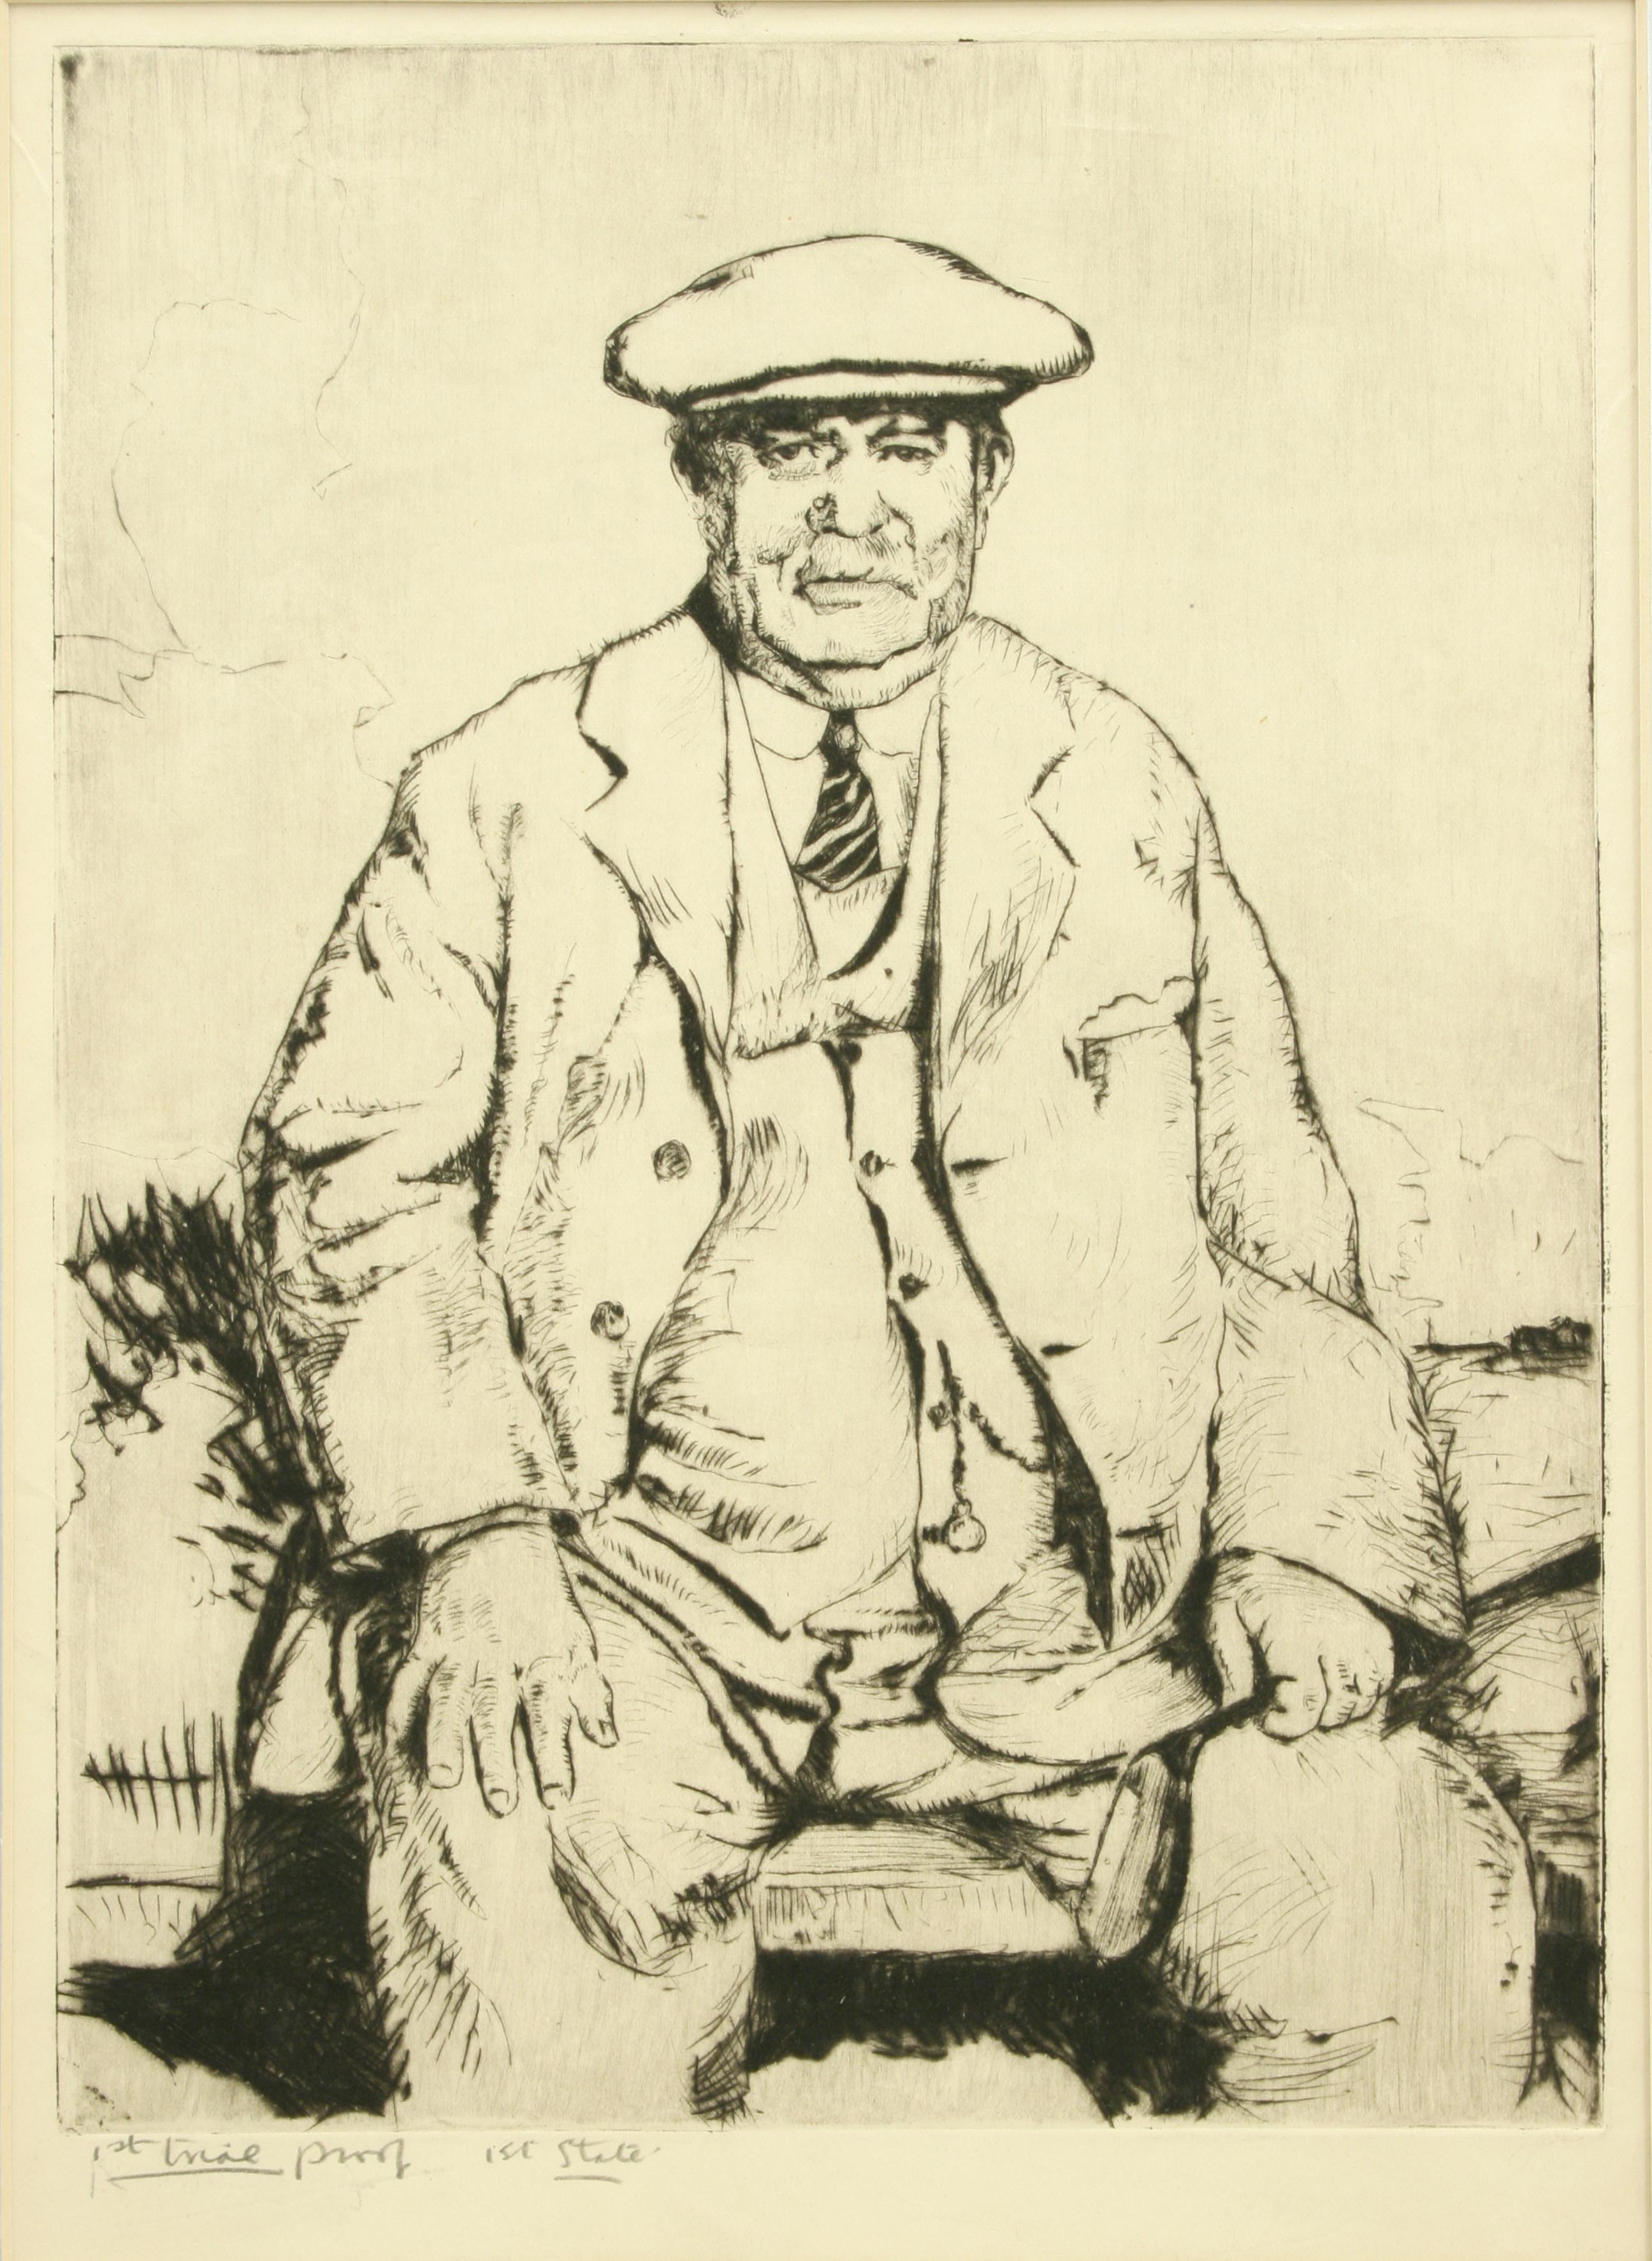 Golf etching, of Andrew Kirkaldy after Robert Smith Forest.
A portrait of a seated Andrew Kirkaldy after Robert Smith Forest. The golf etching is inscribed in pencil '1st trail proof, 1st state'.

Andrew Kirkaldy was born in Denhead, Scotland, in